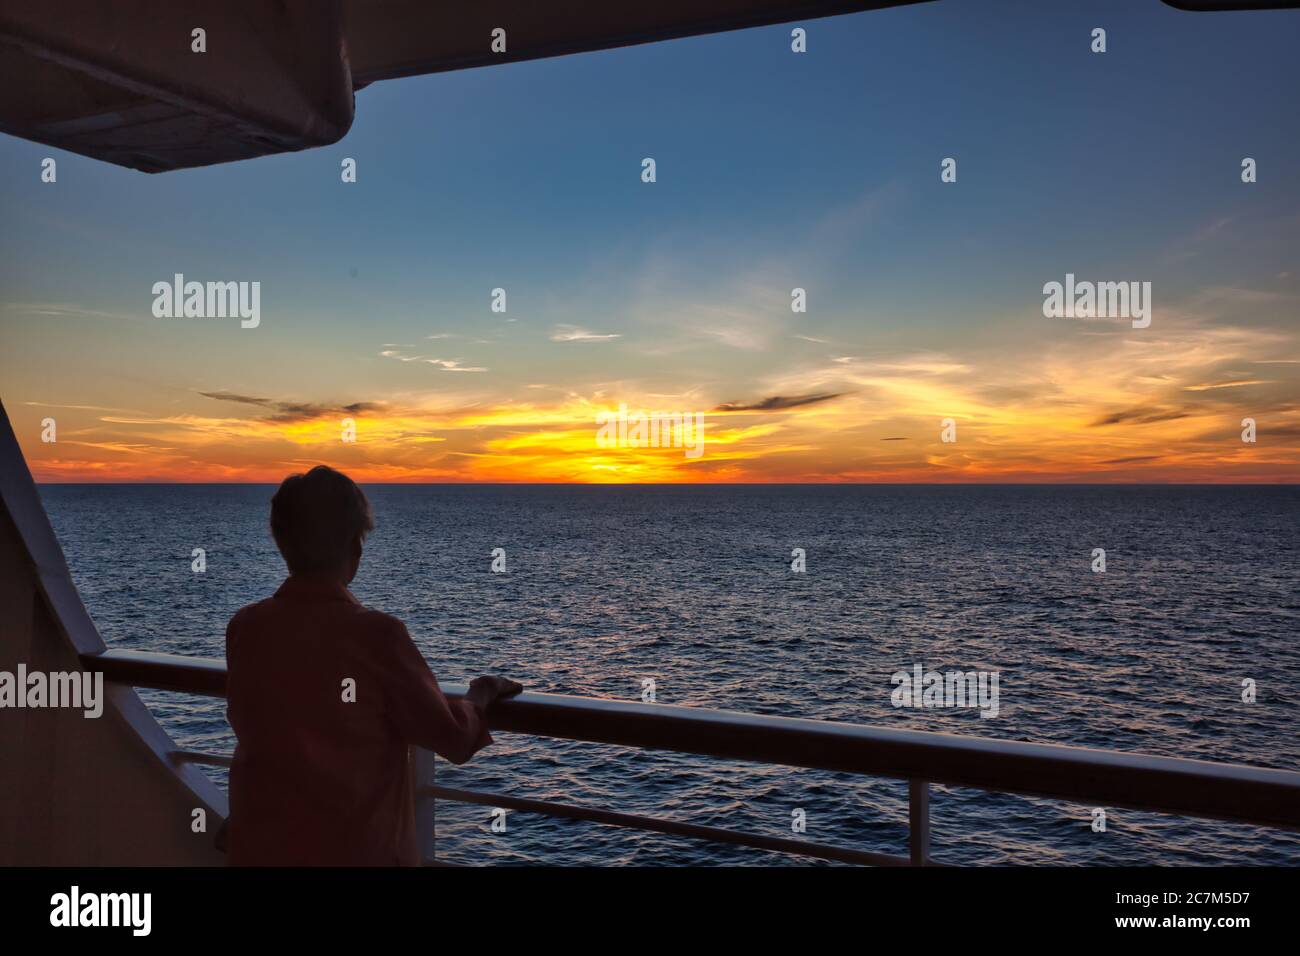 A woman at cruise ship's rail in silhouette watches a lovely sunset go down over the sea Stock Photo